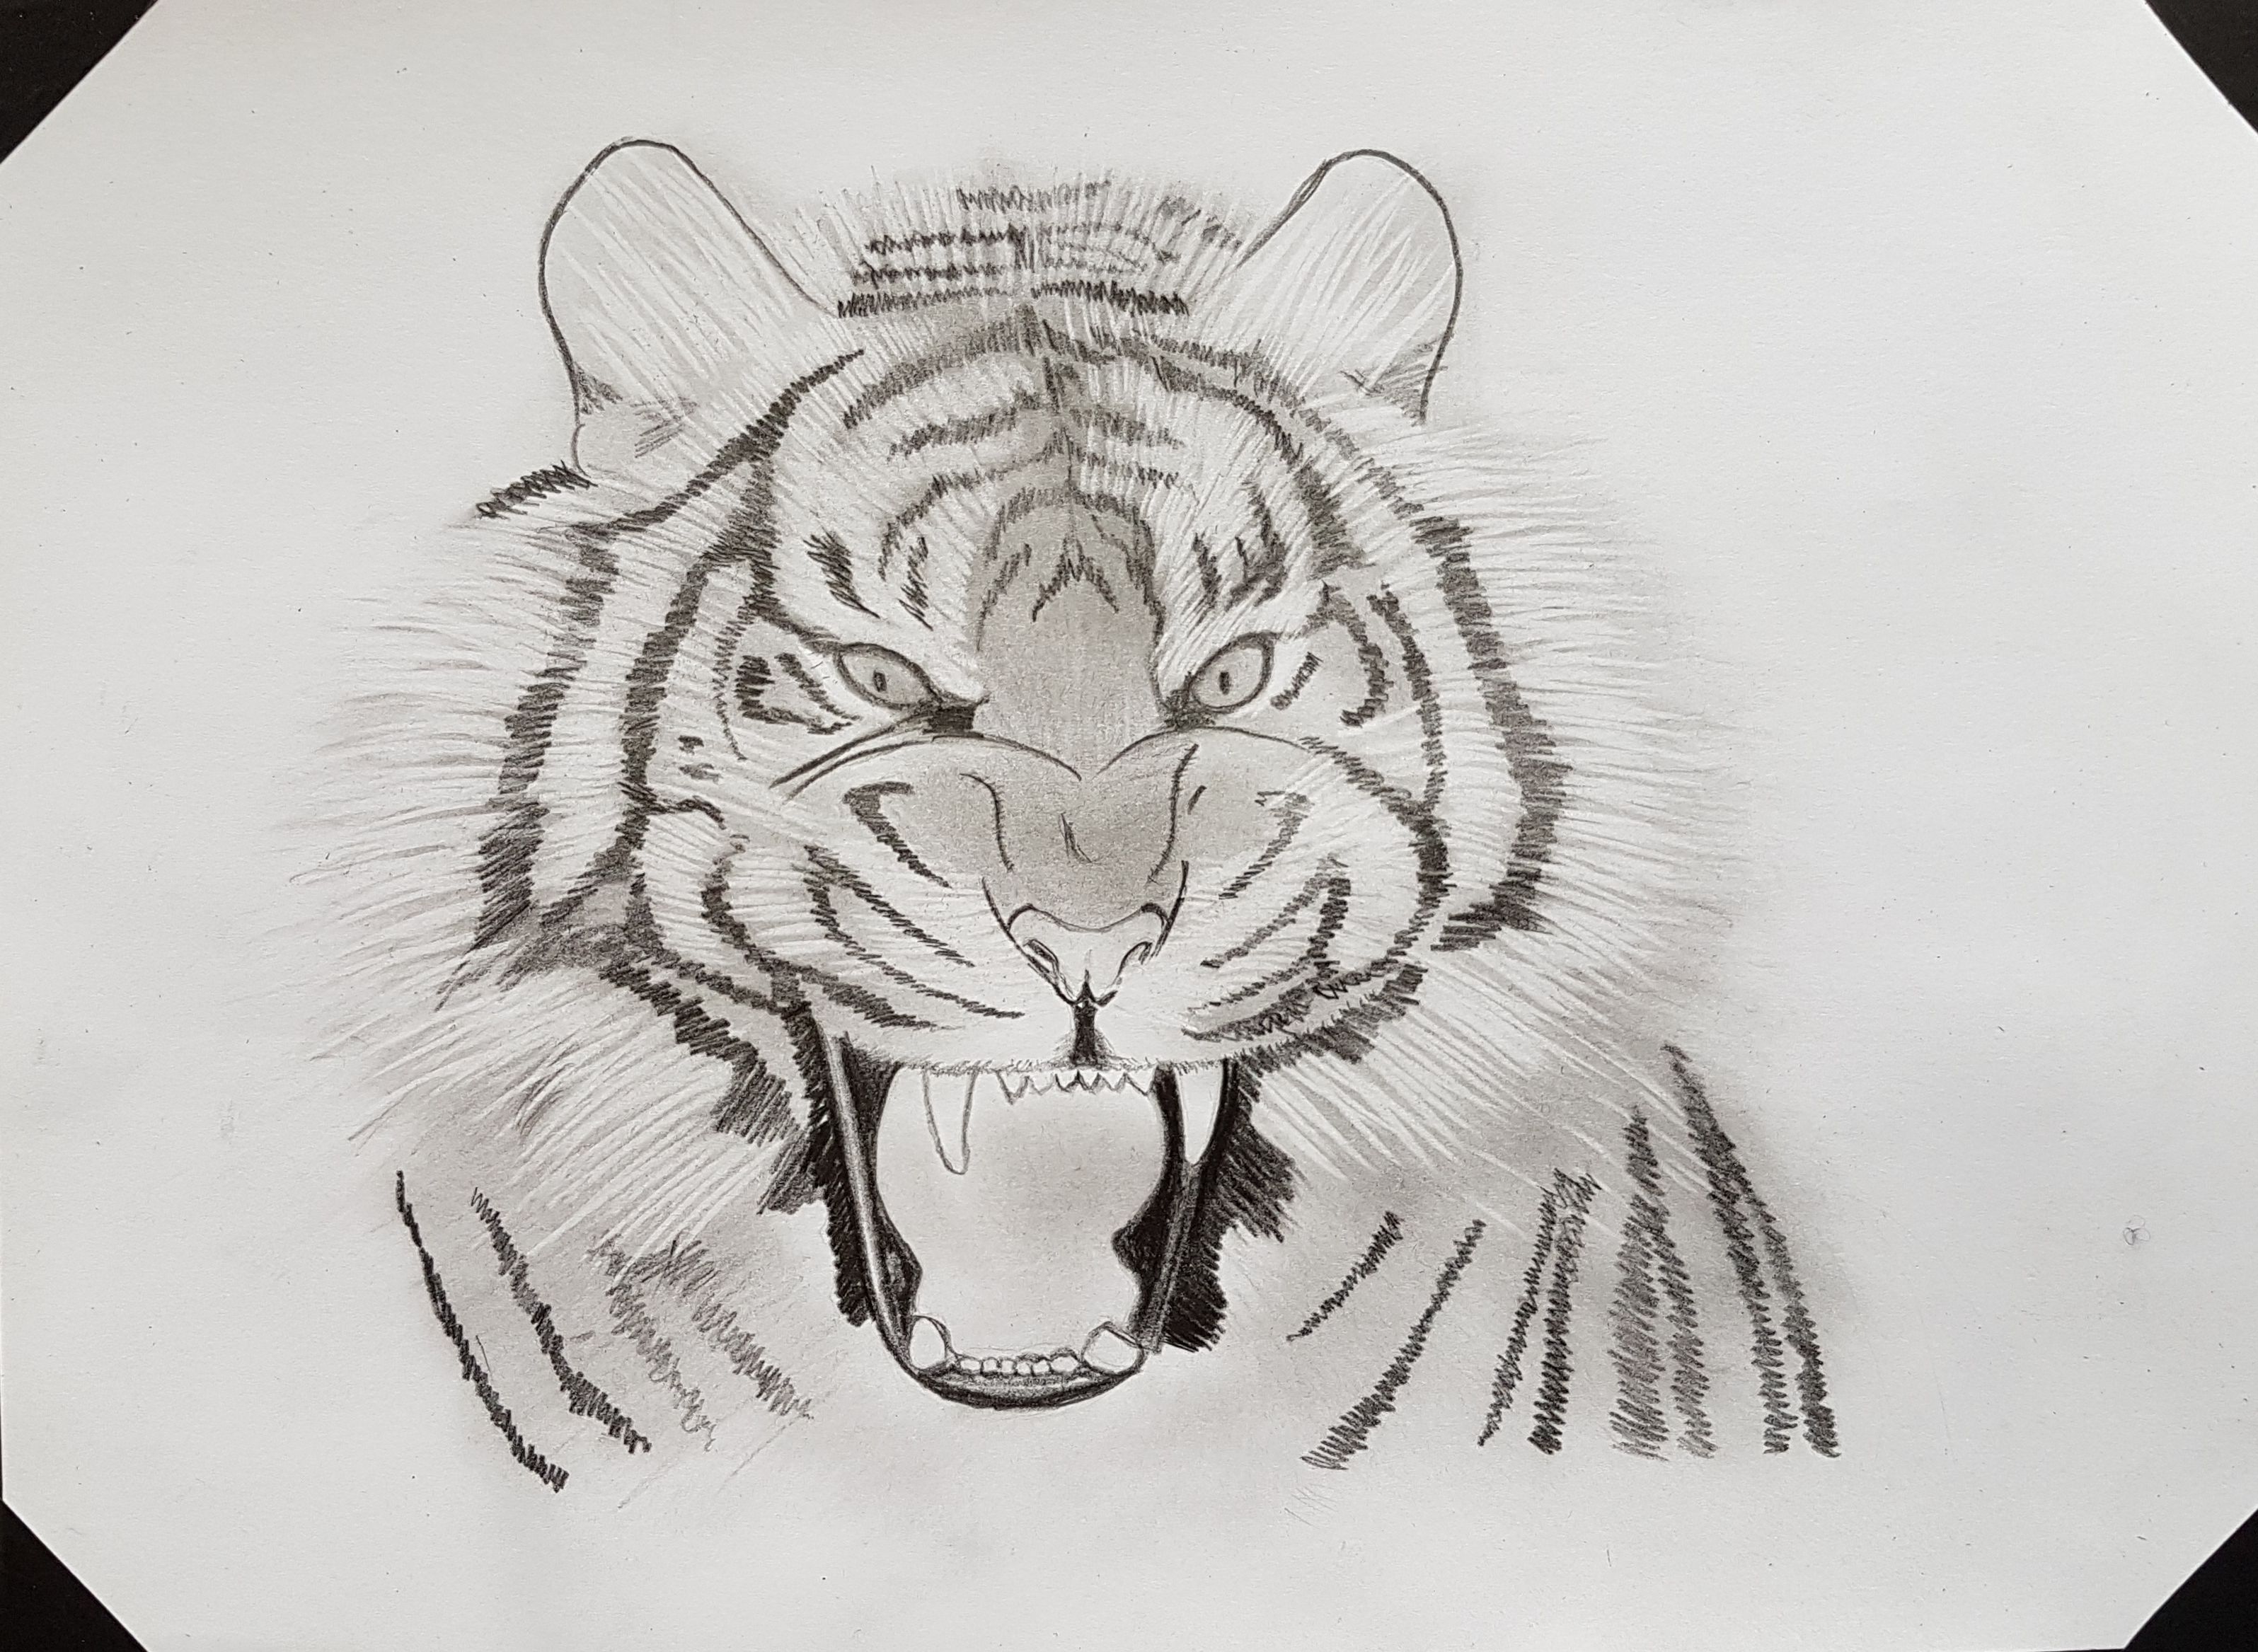 Premium Vector | The roaring angry tiger face with a detailed drawing  illustration